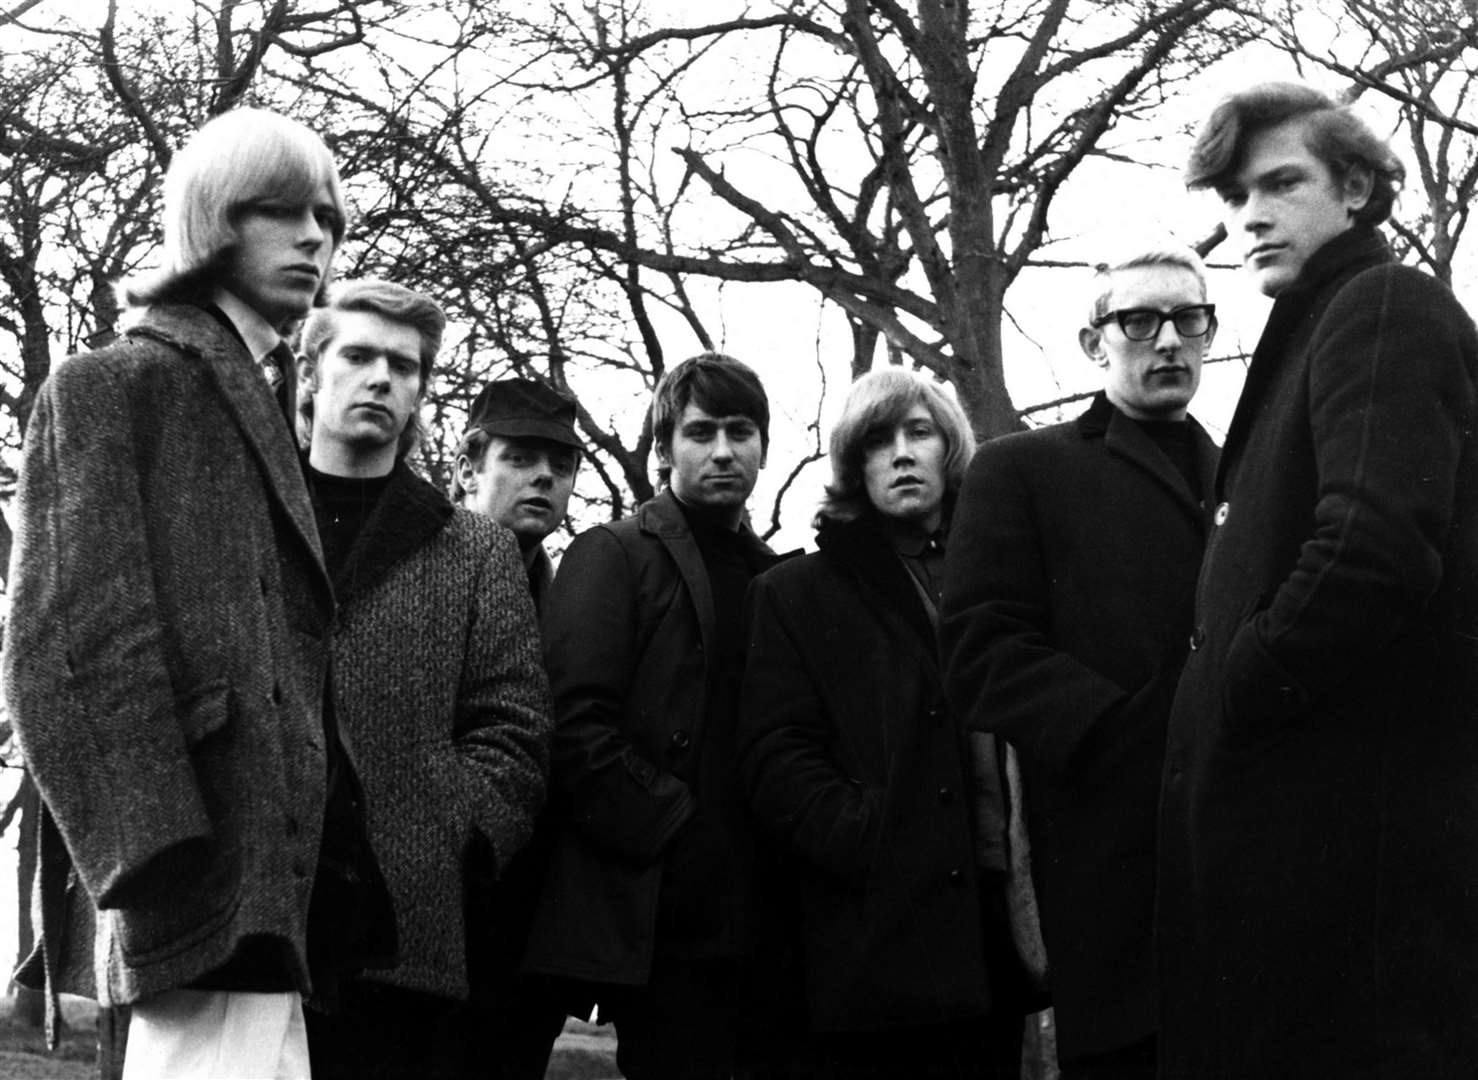 The Manish boys in 1964, with David Bowie, left, and Johnny Edward, second from right